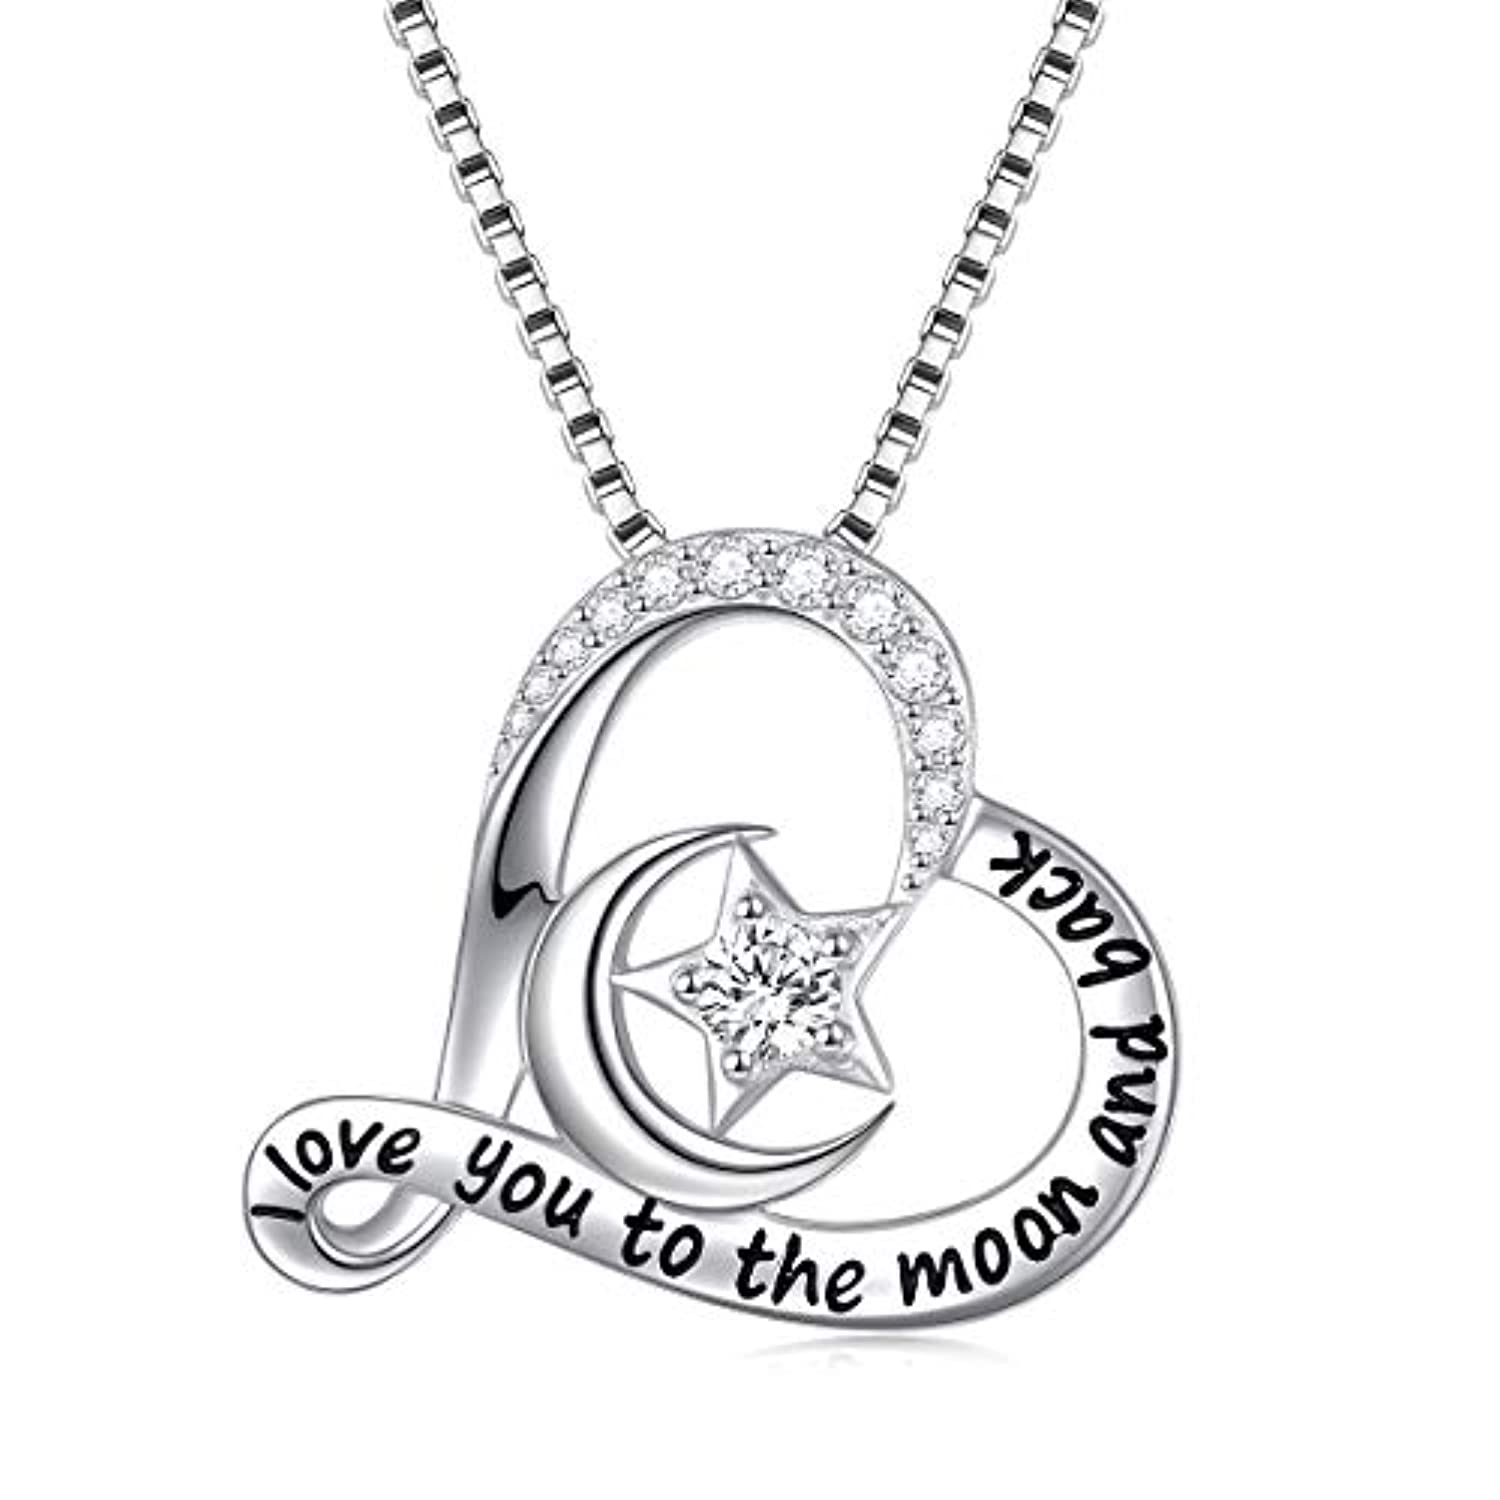 Sterling Silver Best Mum Heart Shaped Pendant With 18 Silver Chain Necklace,  Mother's Day Gift, Personalised Mum's Birthday Present - Etsy